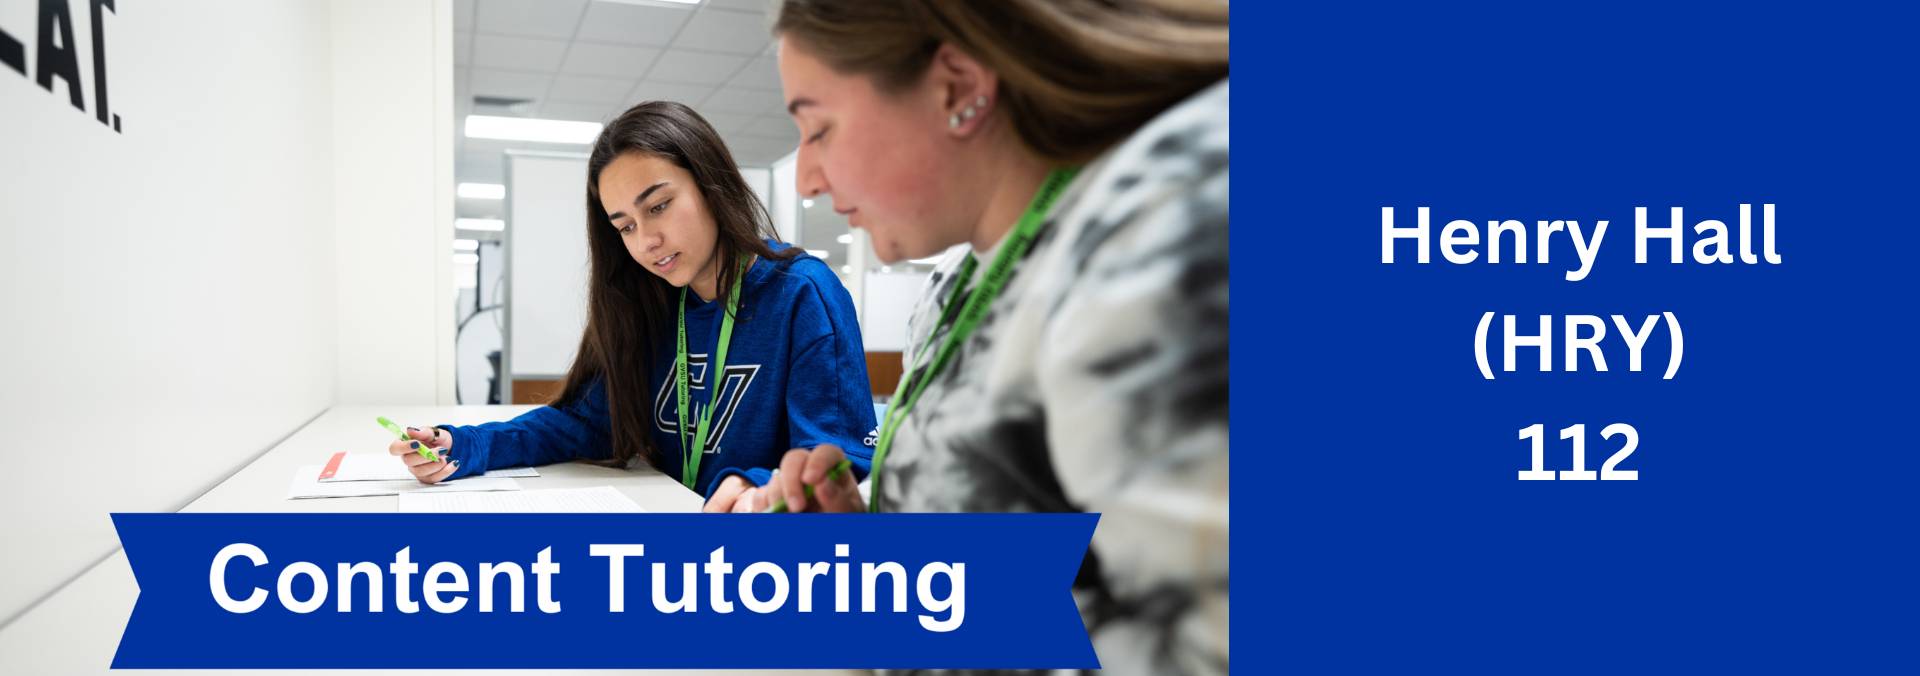 Content Tutoring: Henry Hall (HRY) 112